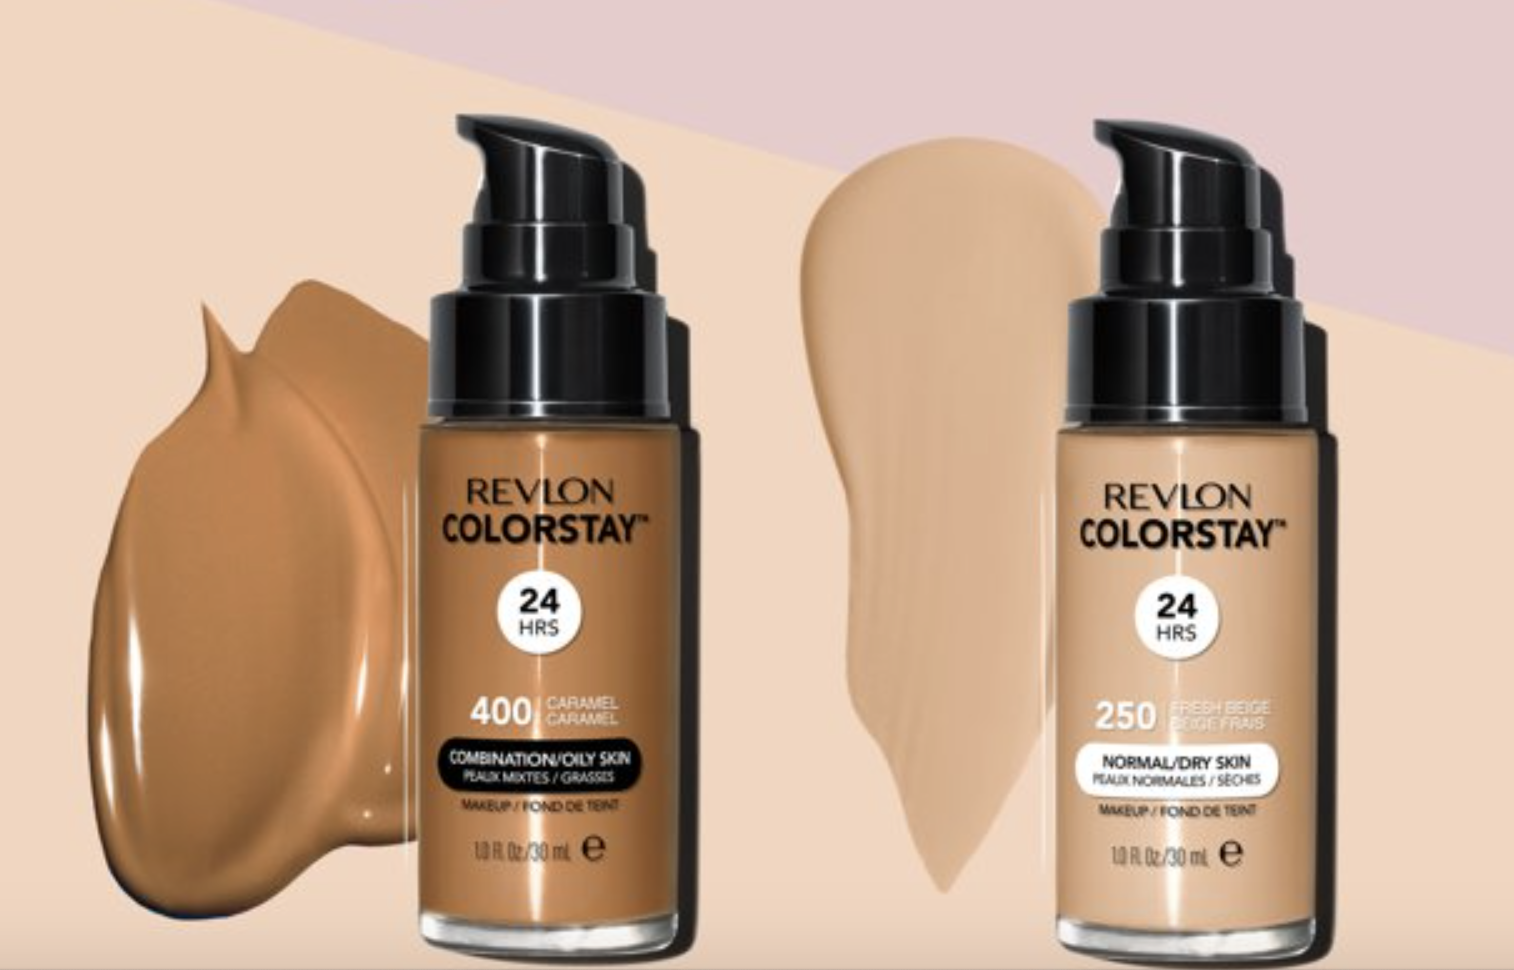 the foundation pumps in two different shades